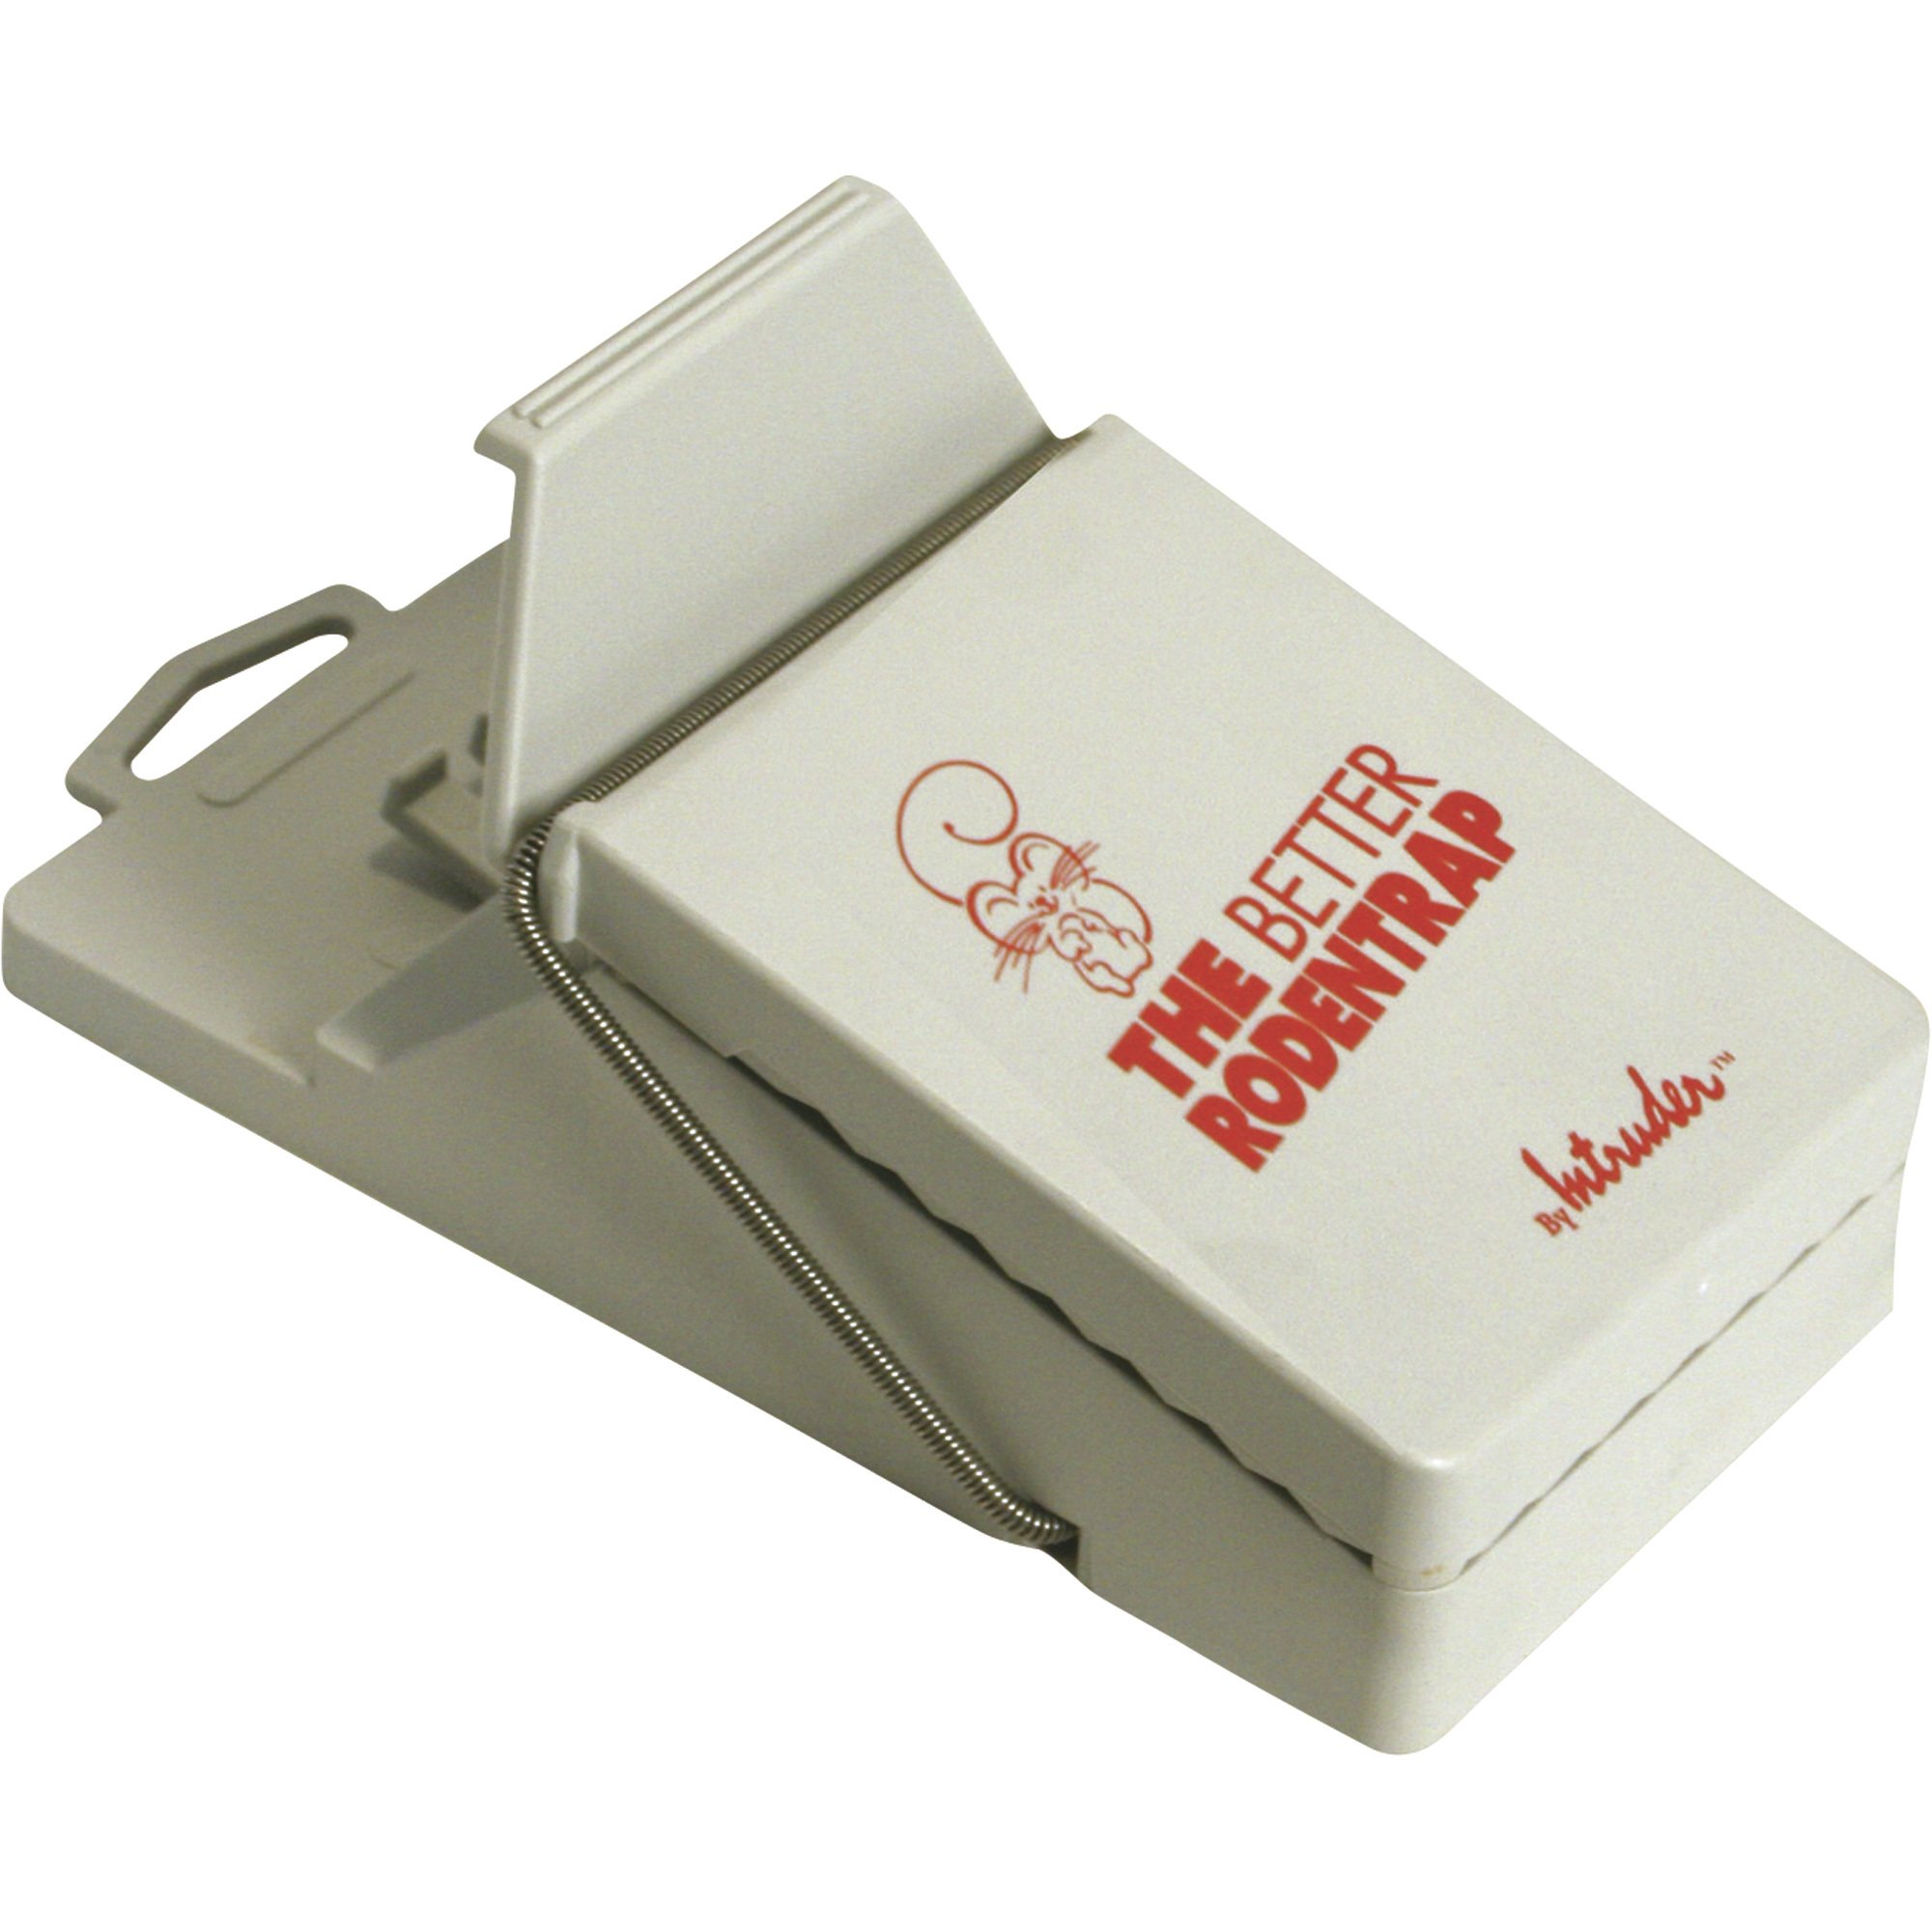 Intruder The Better Rodent Trap, Model# 16500